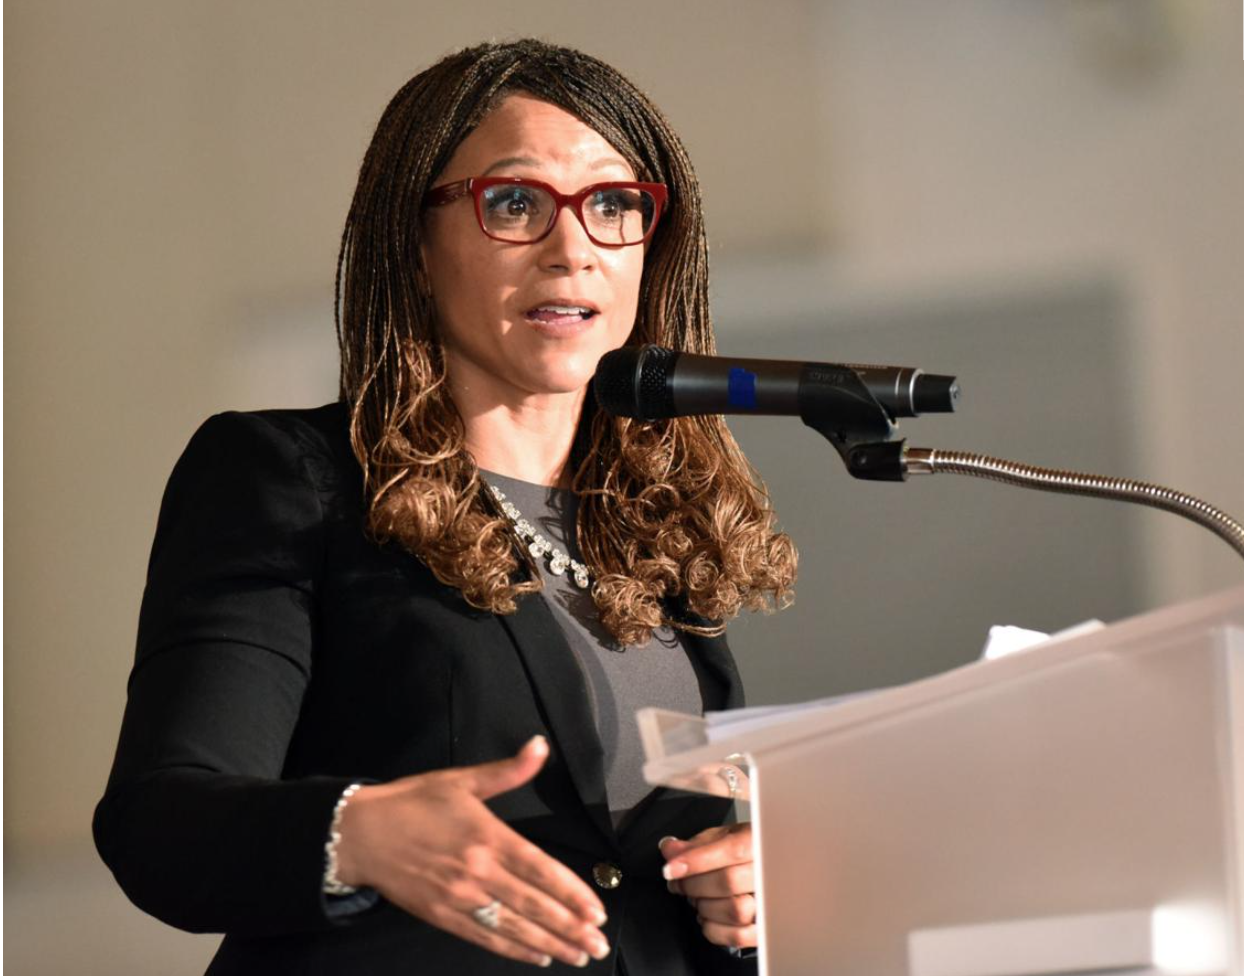 Melissa Harris-Perry Tweets About Conflict With WFU